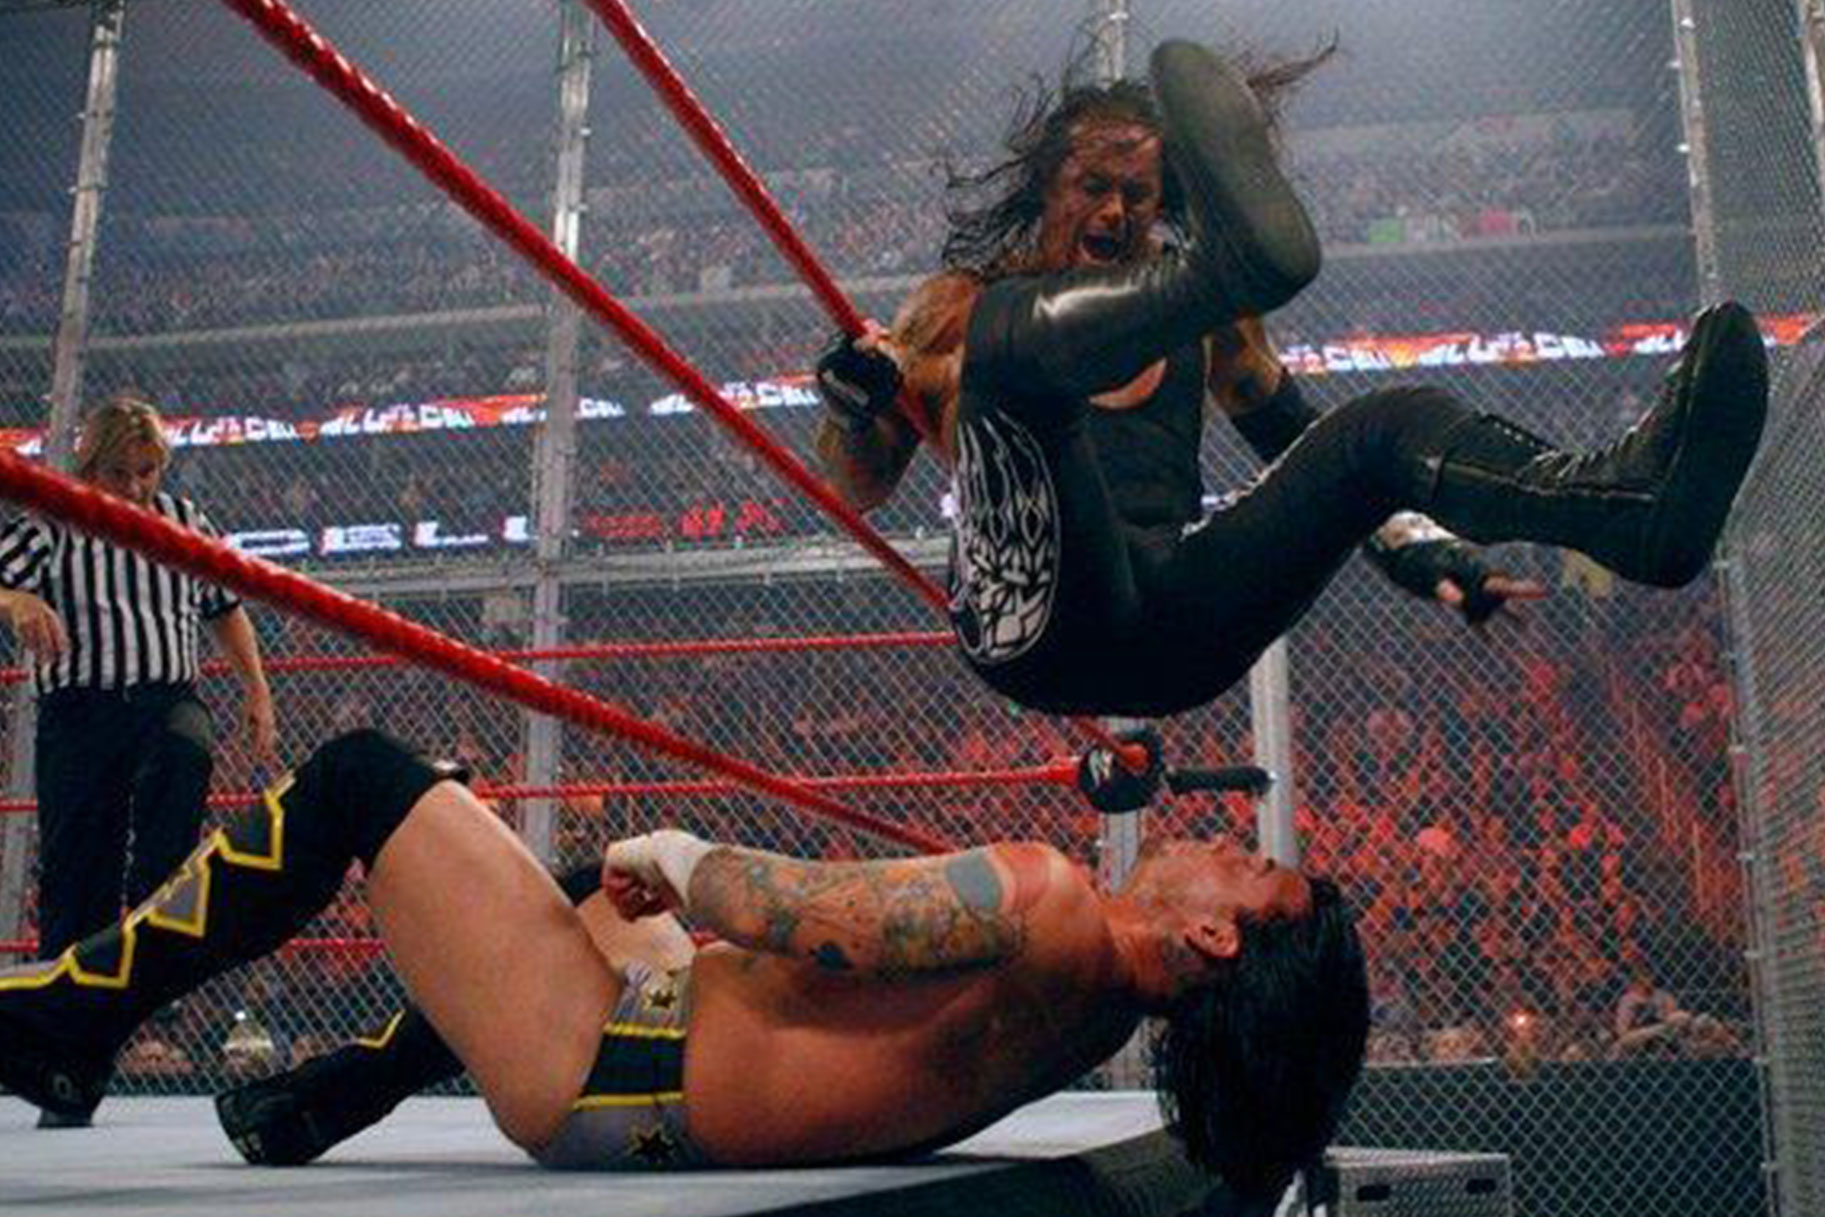 Lets F***ing Gooo”, “Underwhelming”: Fans Divided as the Undertaker Is  Coming Back After Almost 9 Months Along With Other WWE Legends Ahead of  Royal Rumble 2023 - EssentiallySports